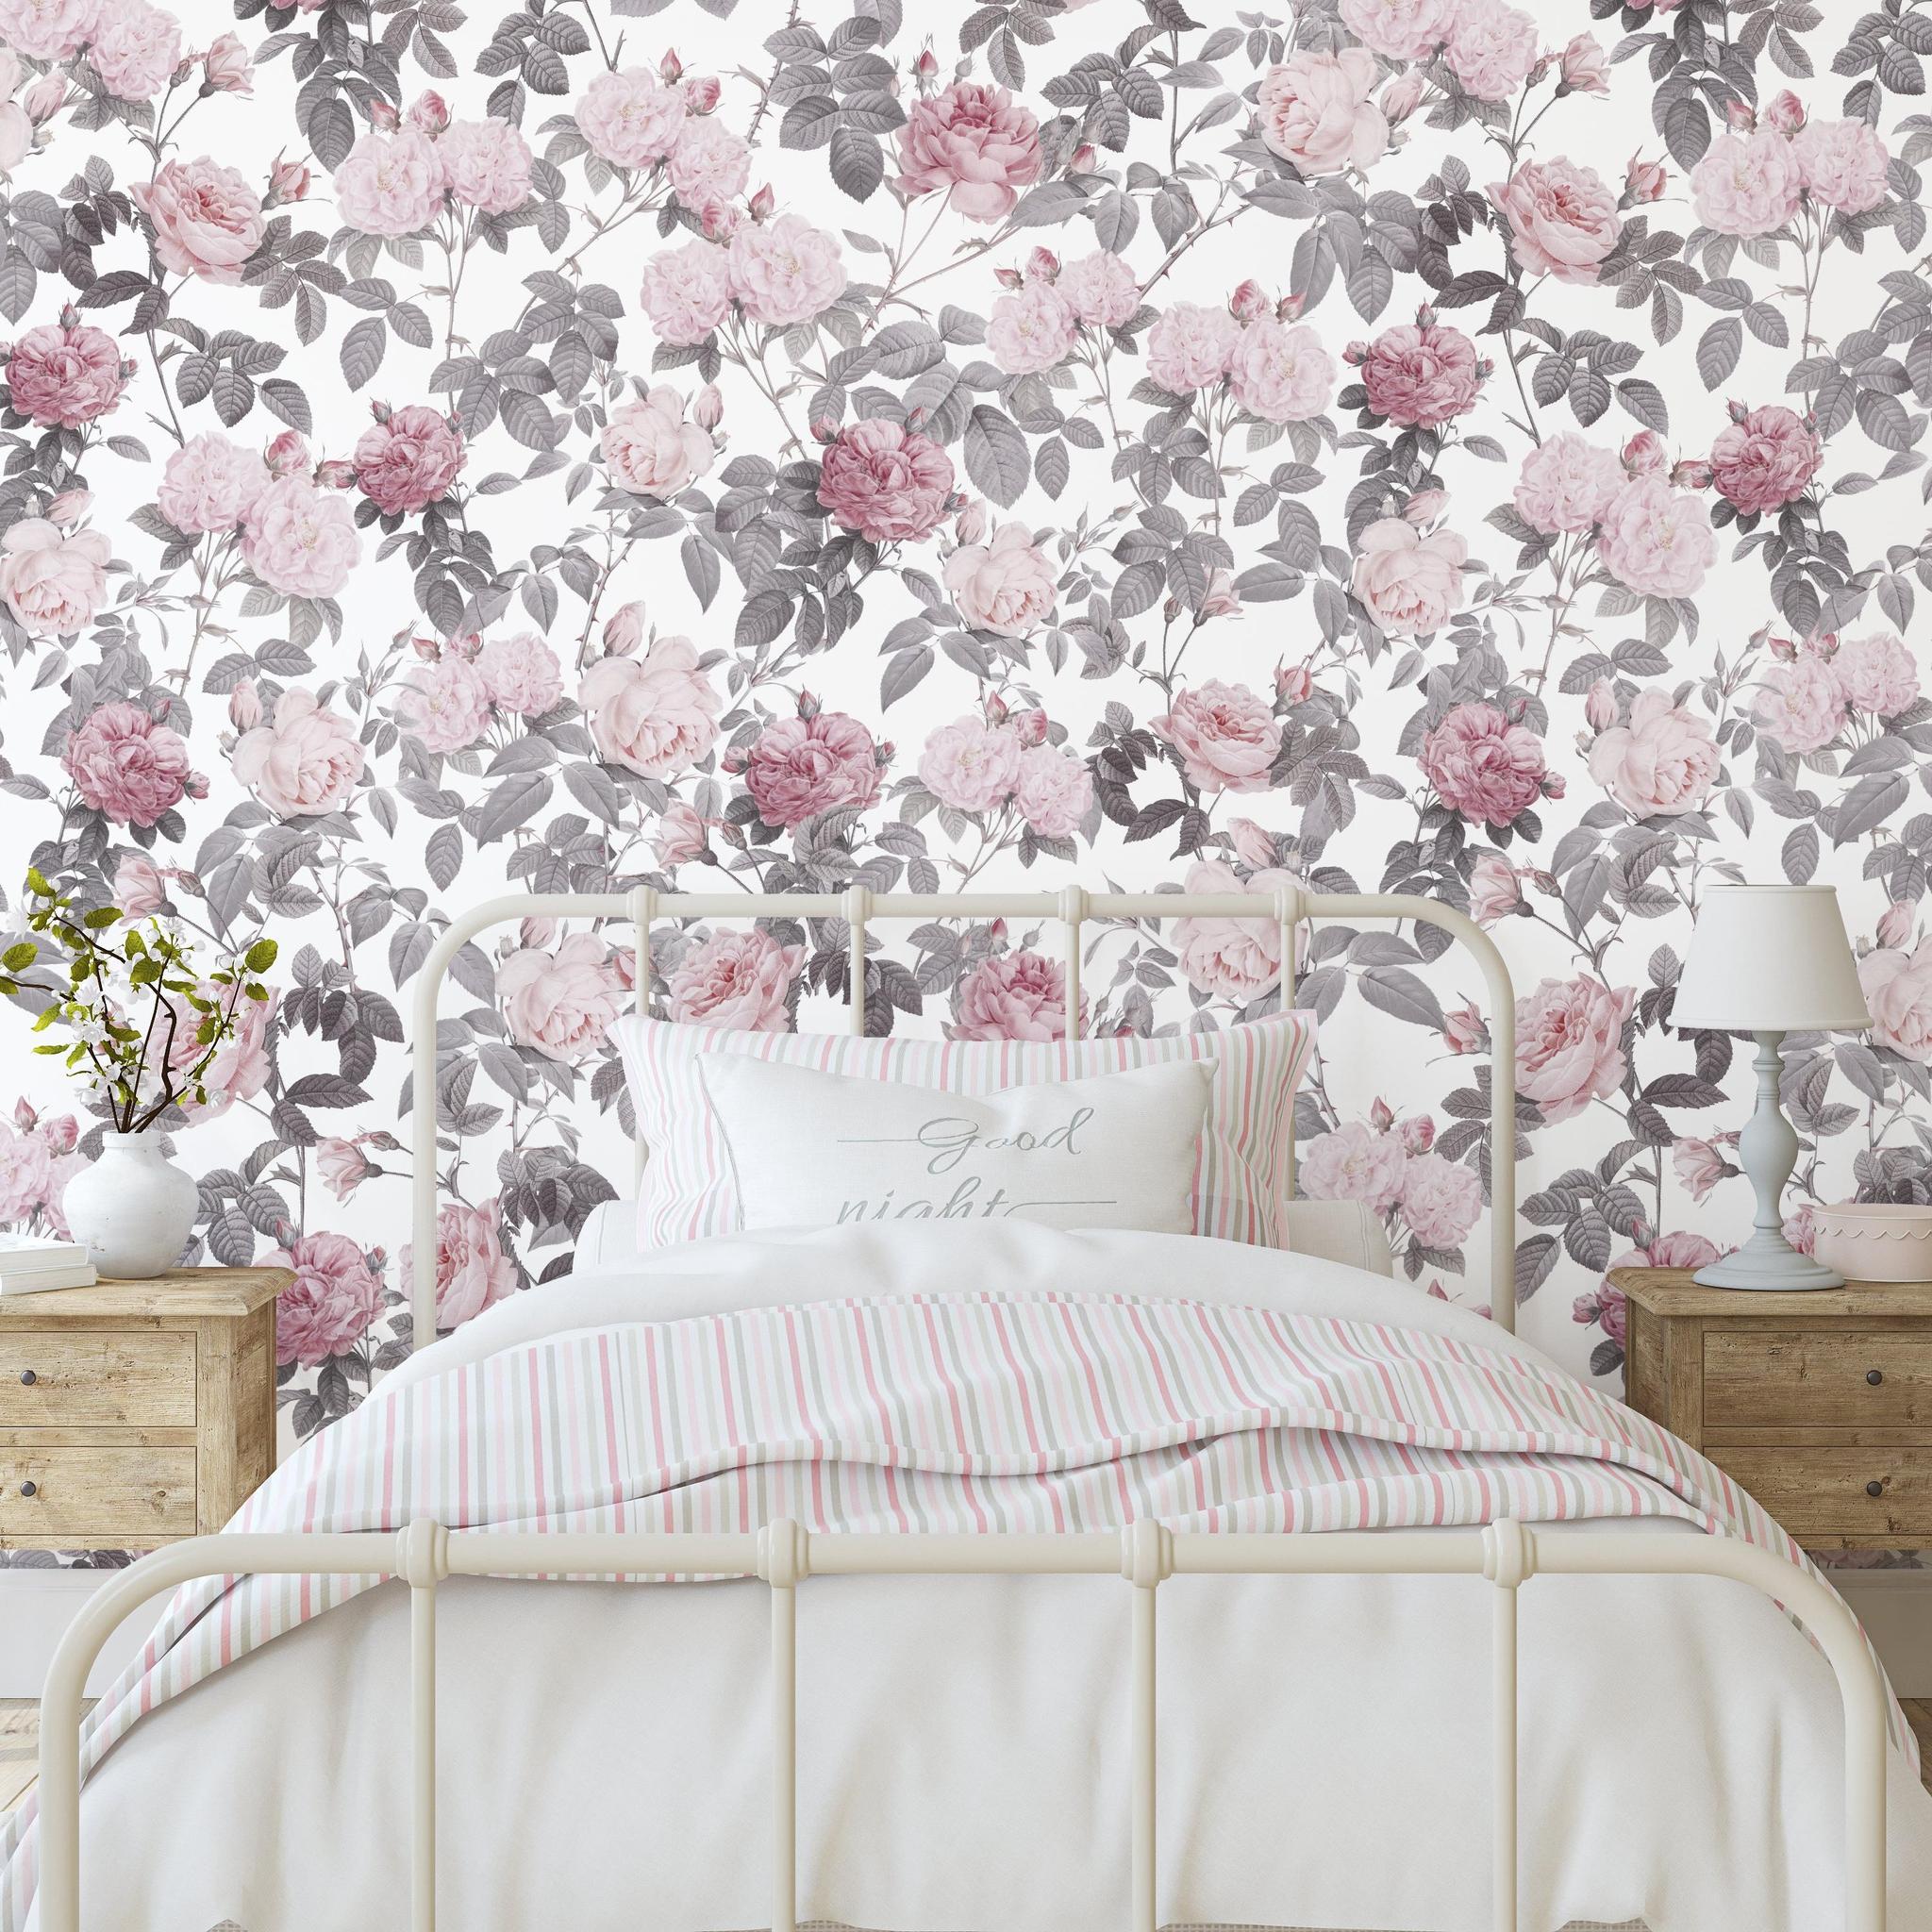 Wall Blush SG02 Secret Garden (White) Wallpaper in a cozy bedroom setting with floral design focus.
